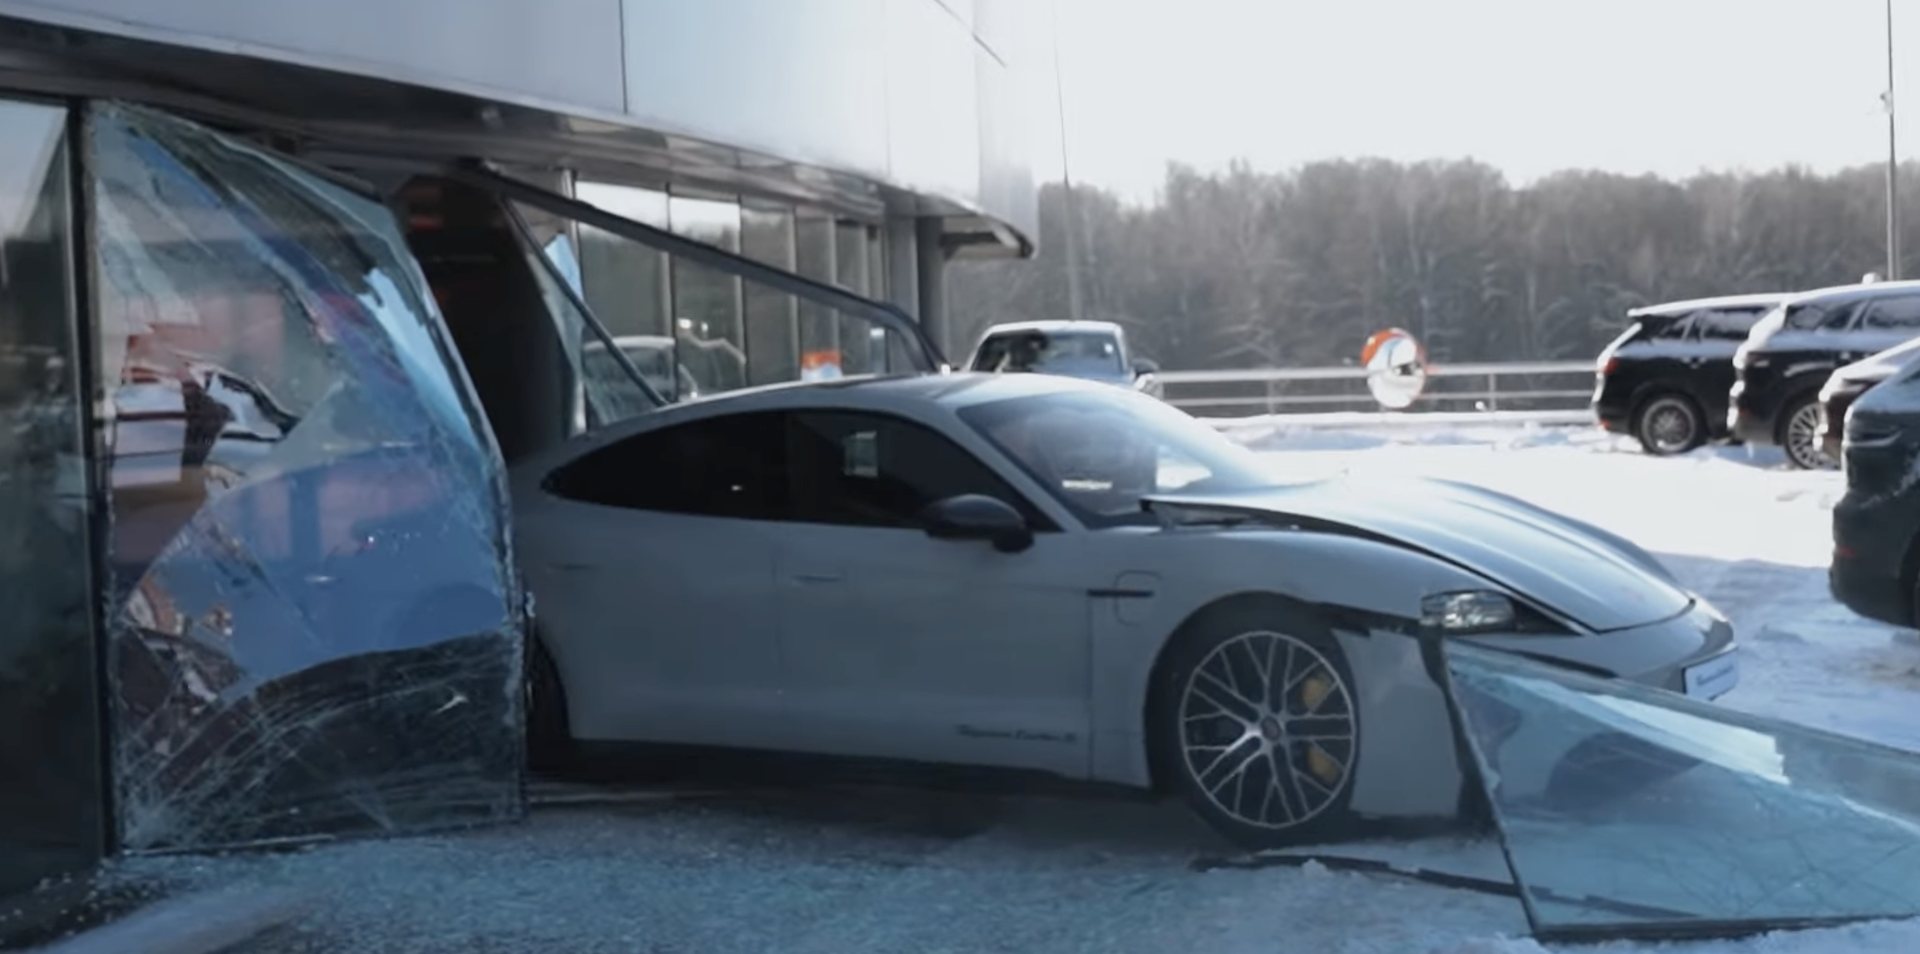 An image of a 2021 Porsche Taycan Turbo S slamming through the windows of a dealership.